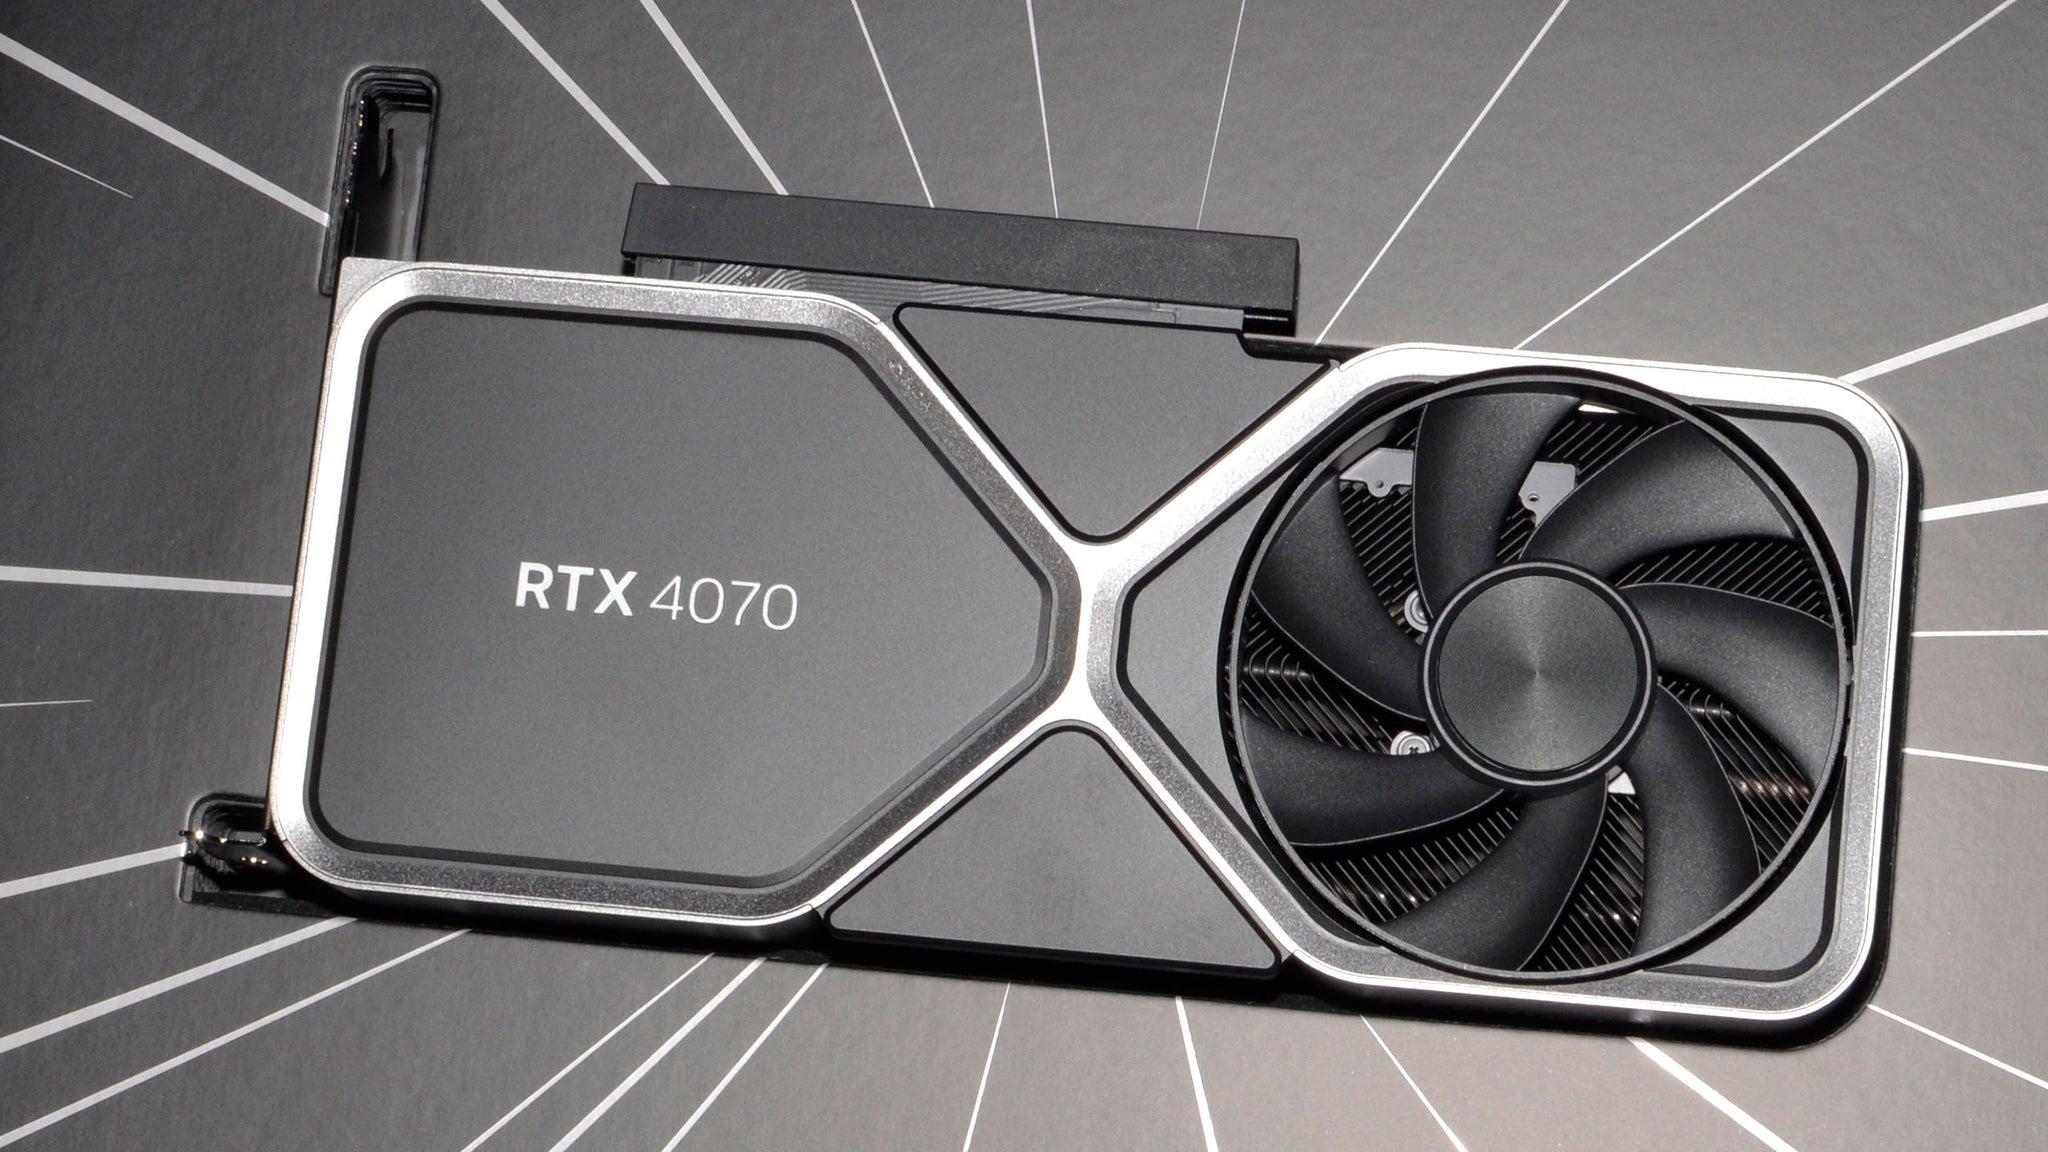 The Best Geforce Graphics Card